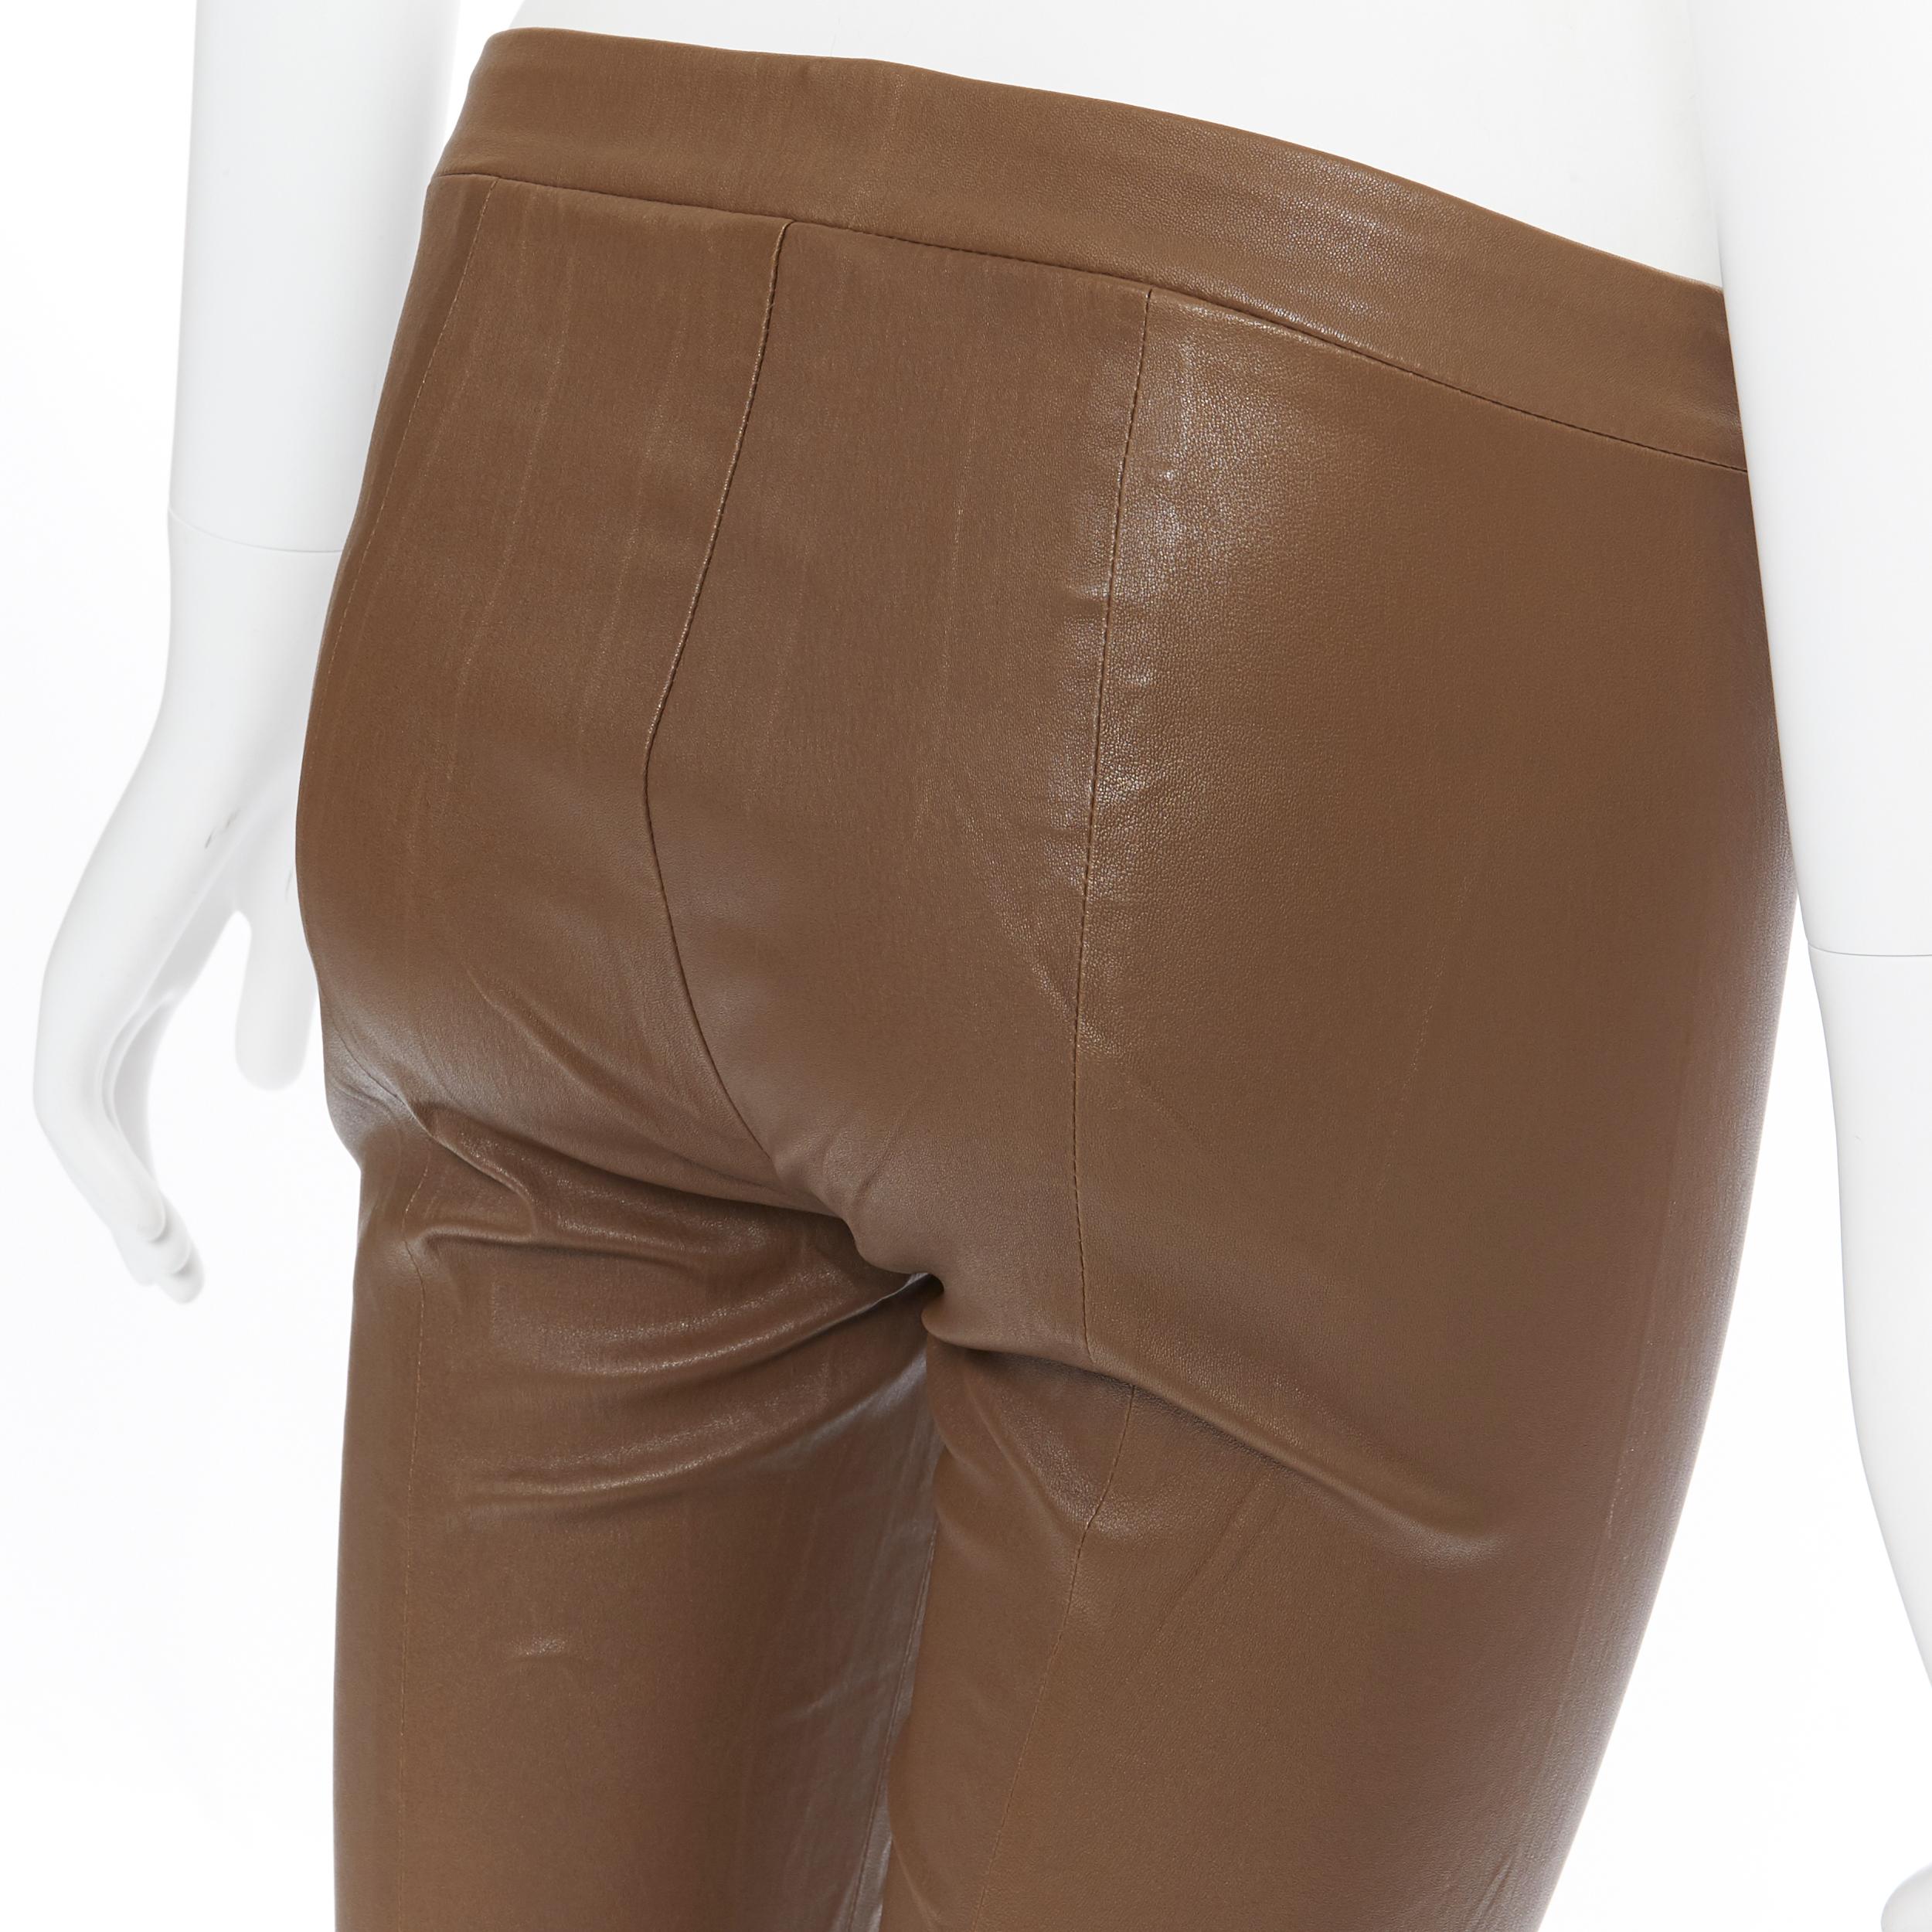 VINCE 100% leather tan brown minimal stretchy skinny leg pants XS
Brand: Vince
Model Name / Style: Leather legging
Material: Leather
Color: Brown
Pattern: Solid
Extra Detail: Minimalist stretch leather leggings. Mid rise. Skinny leg.
Made in: